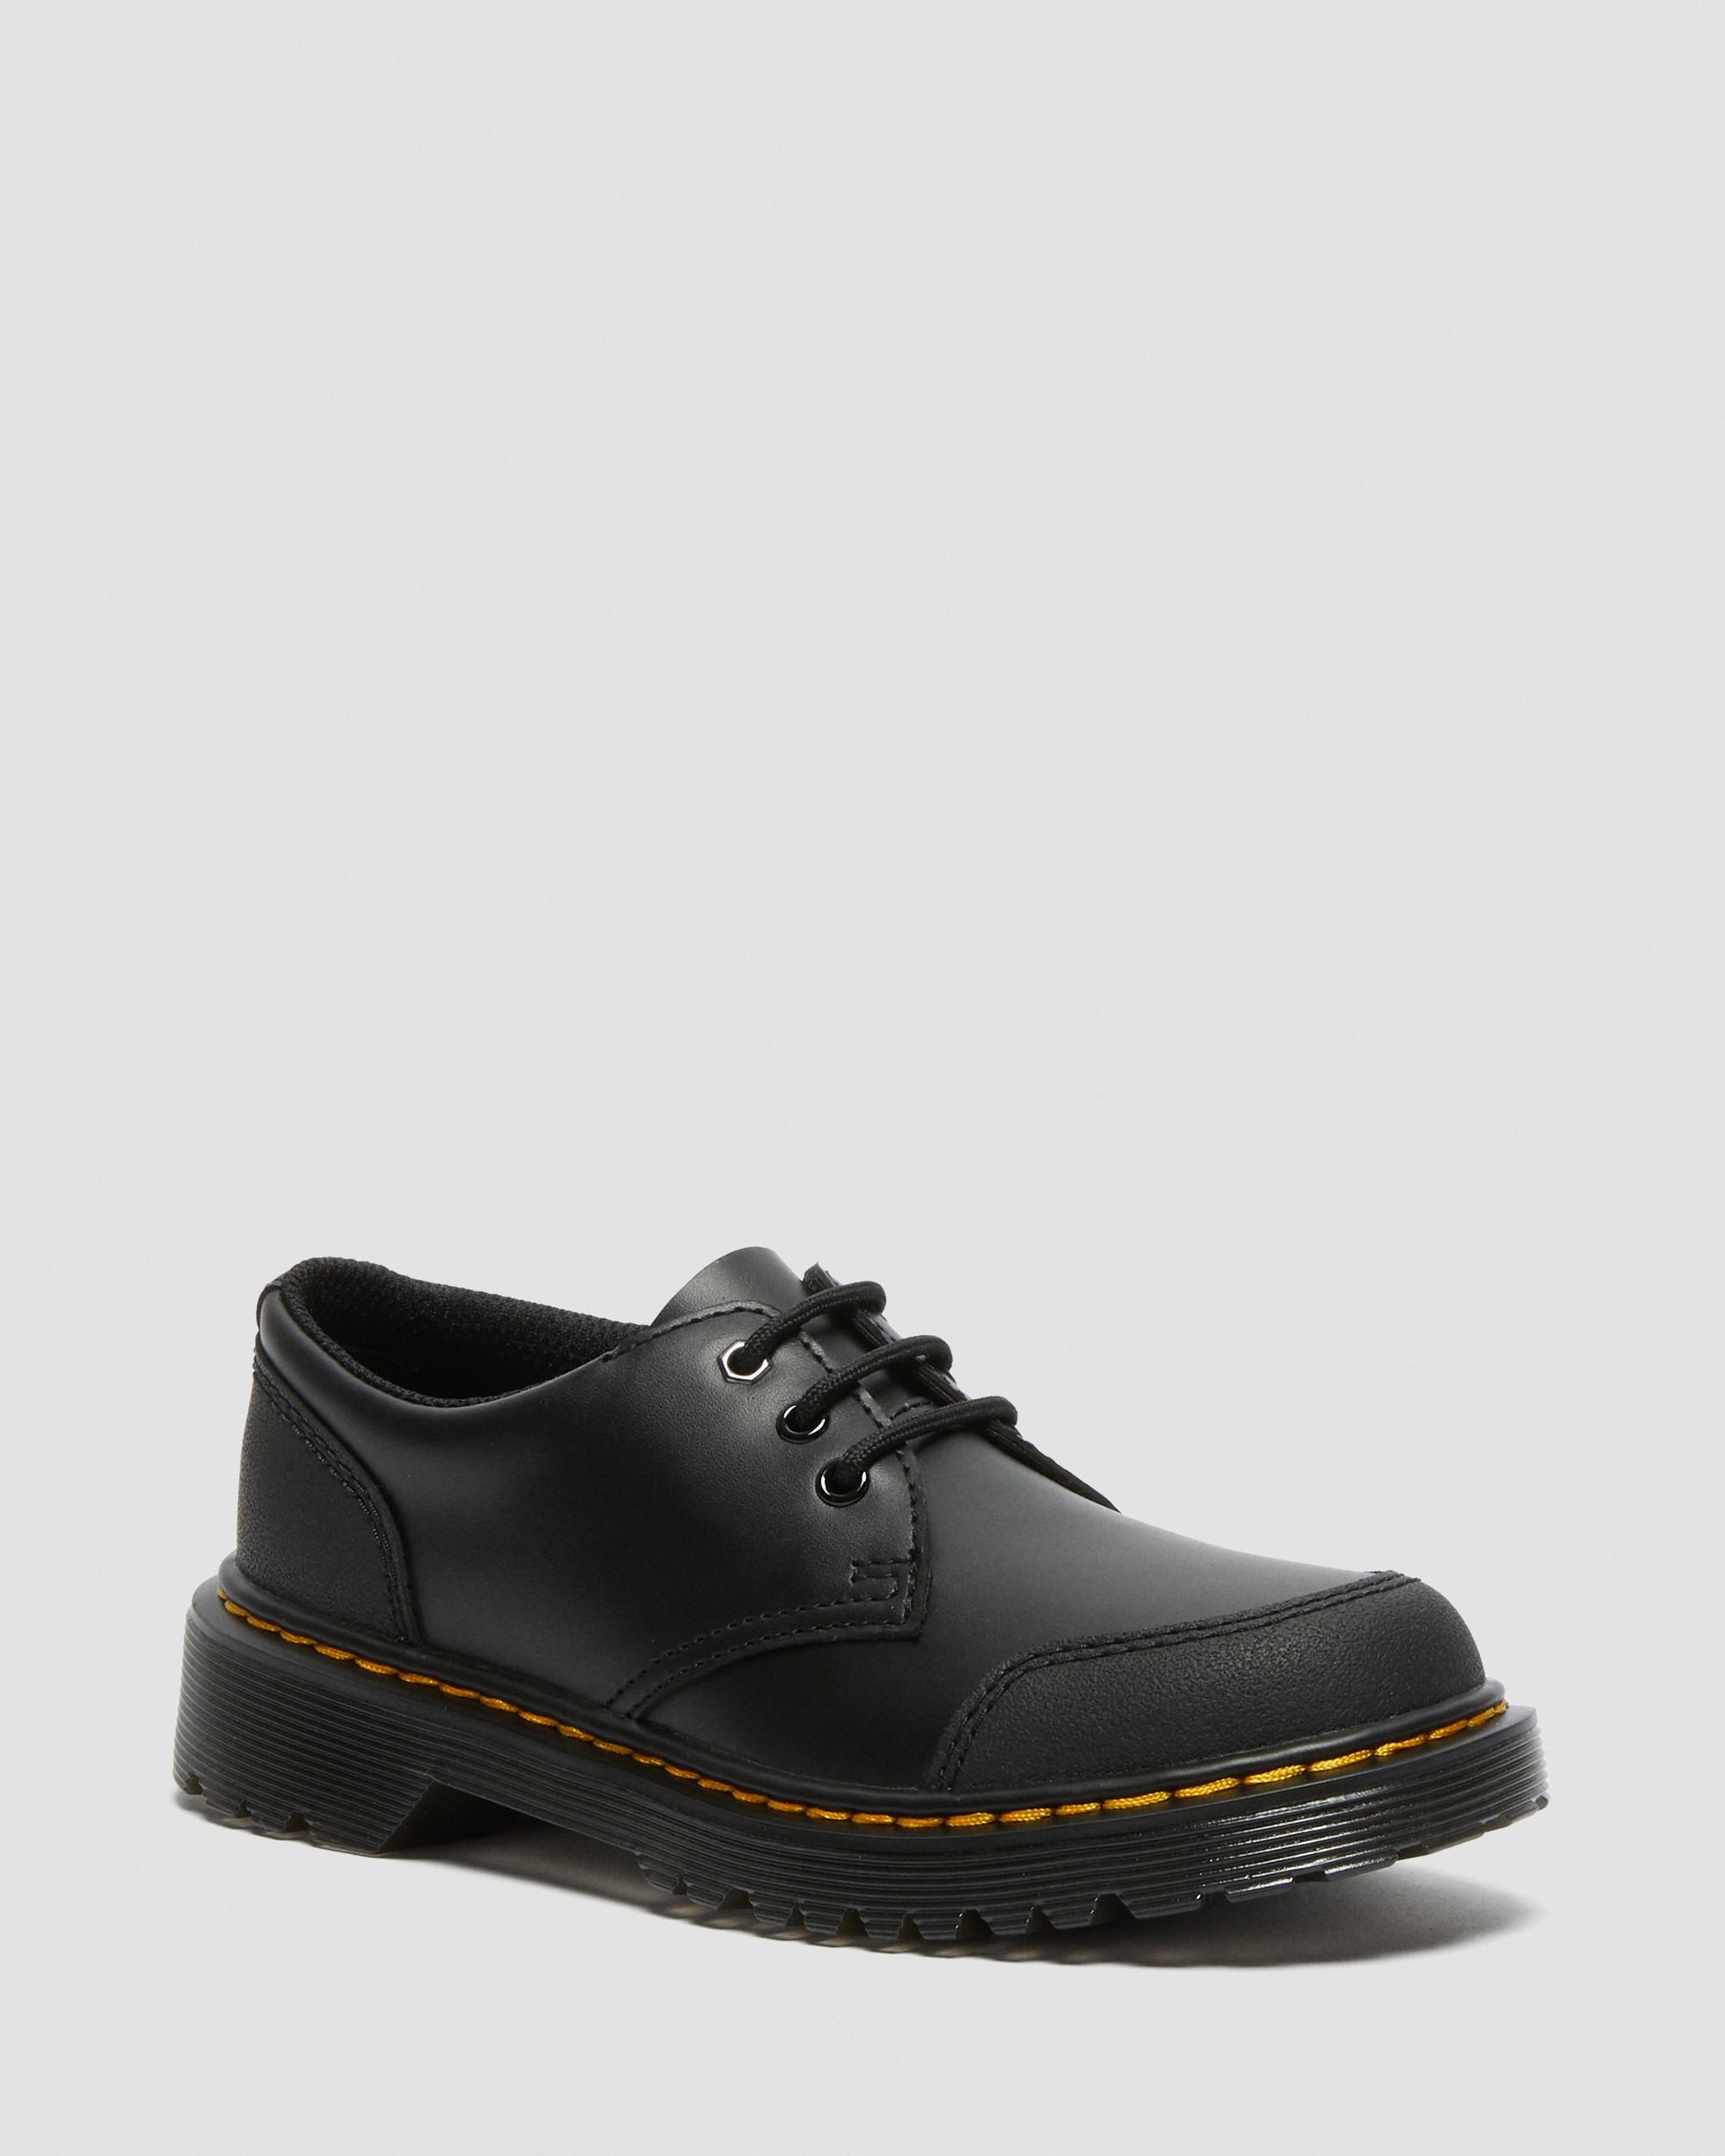 Junior 1461 Overlay Leather Shoes in Black | Dr. Martens